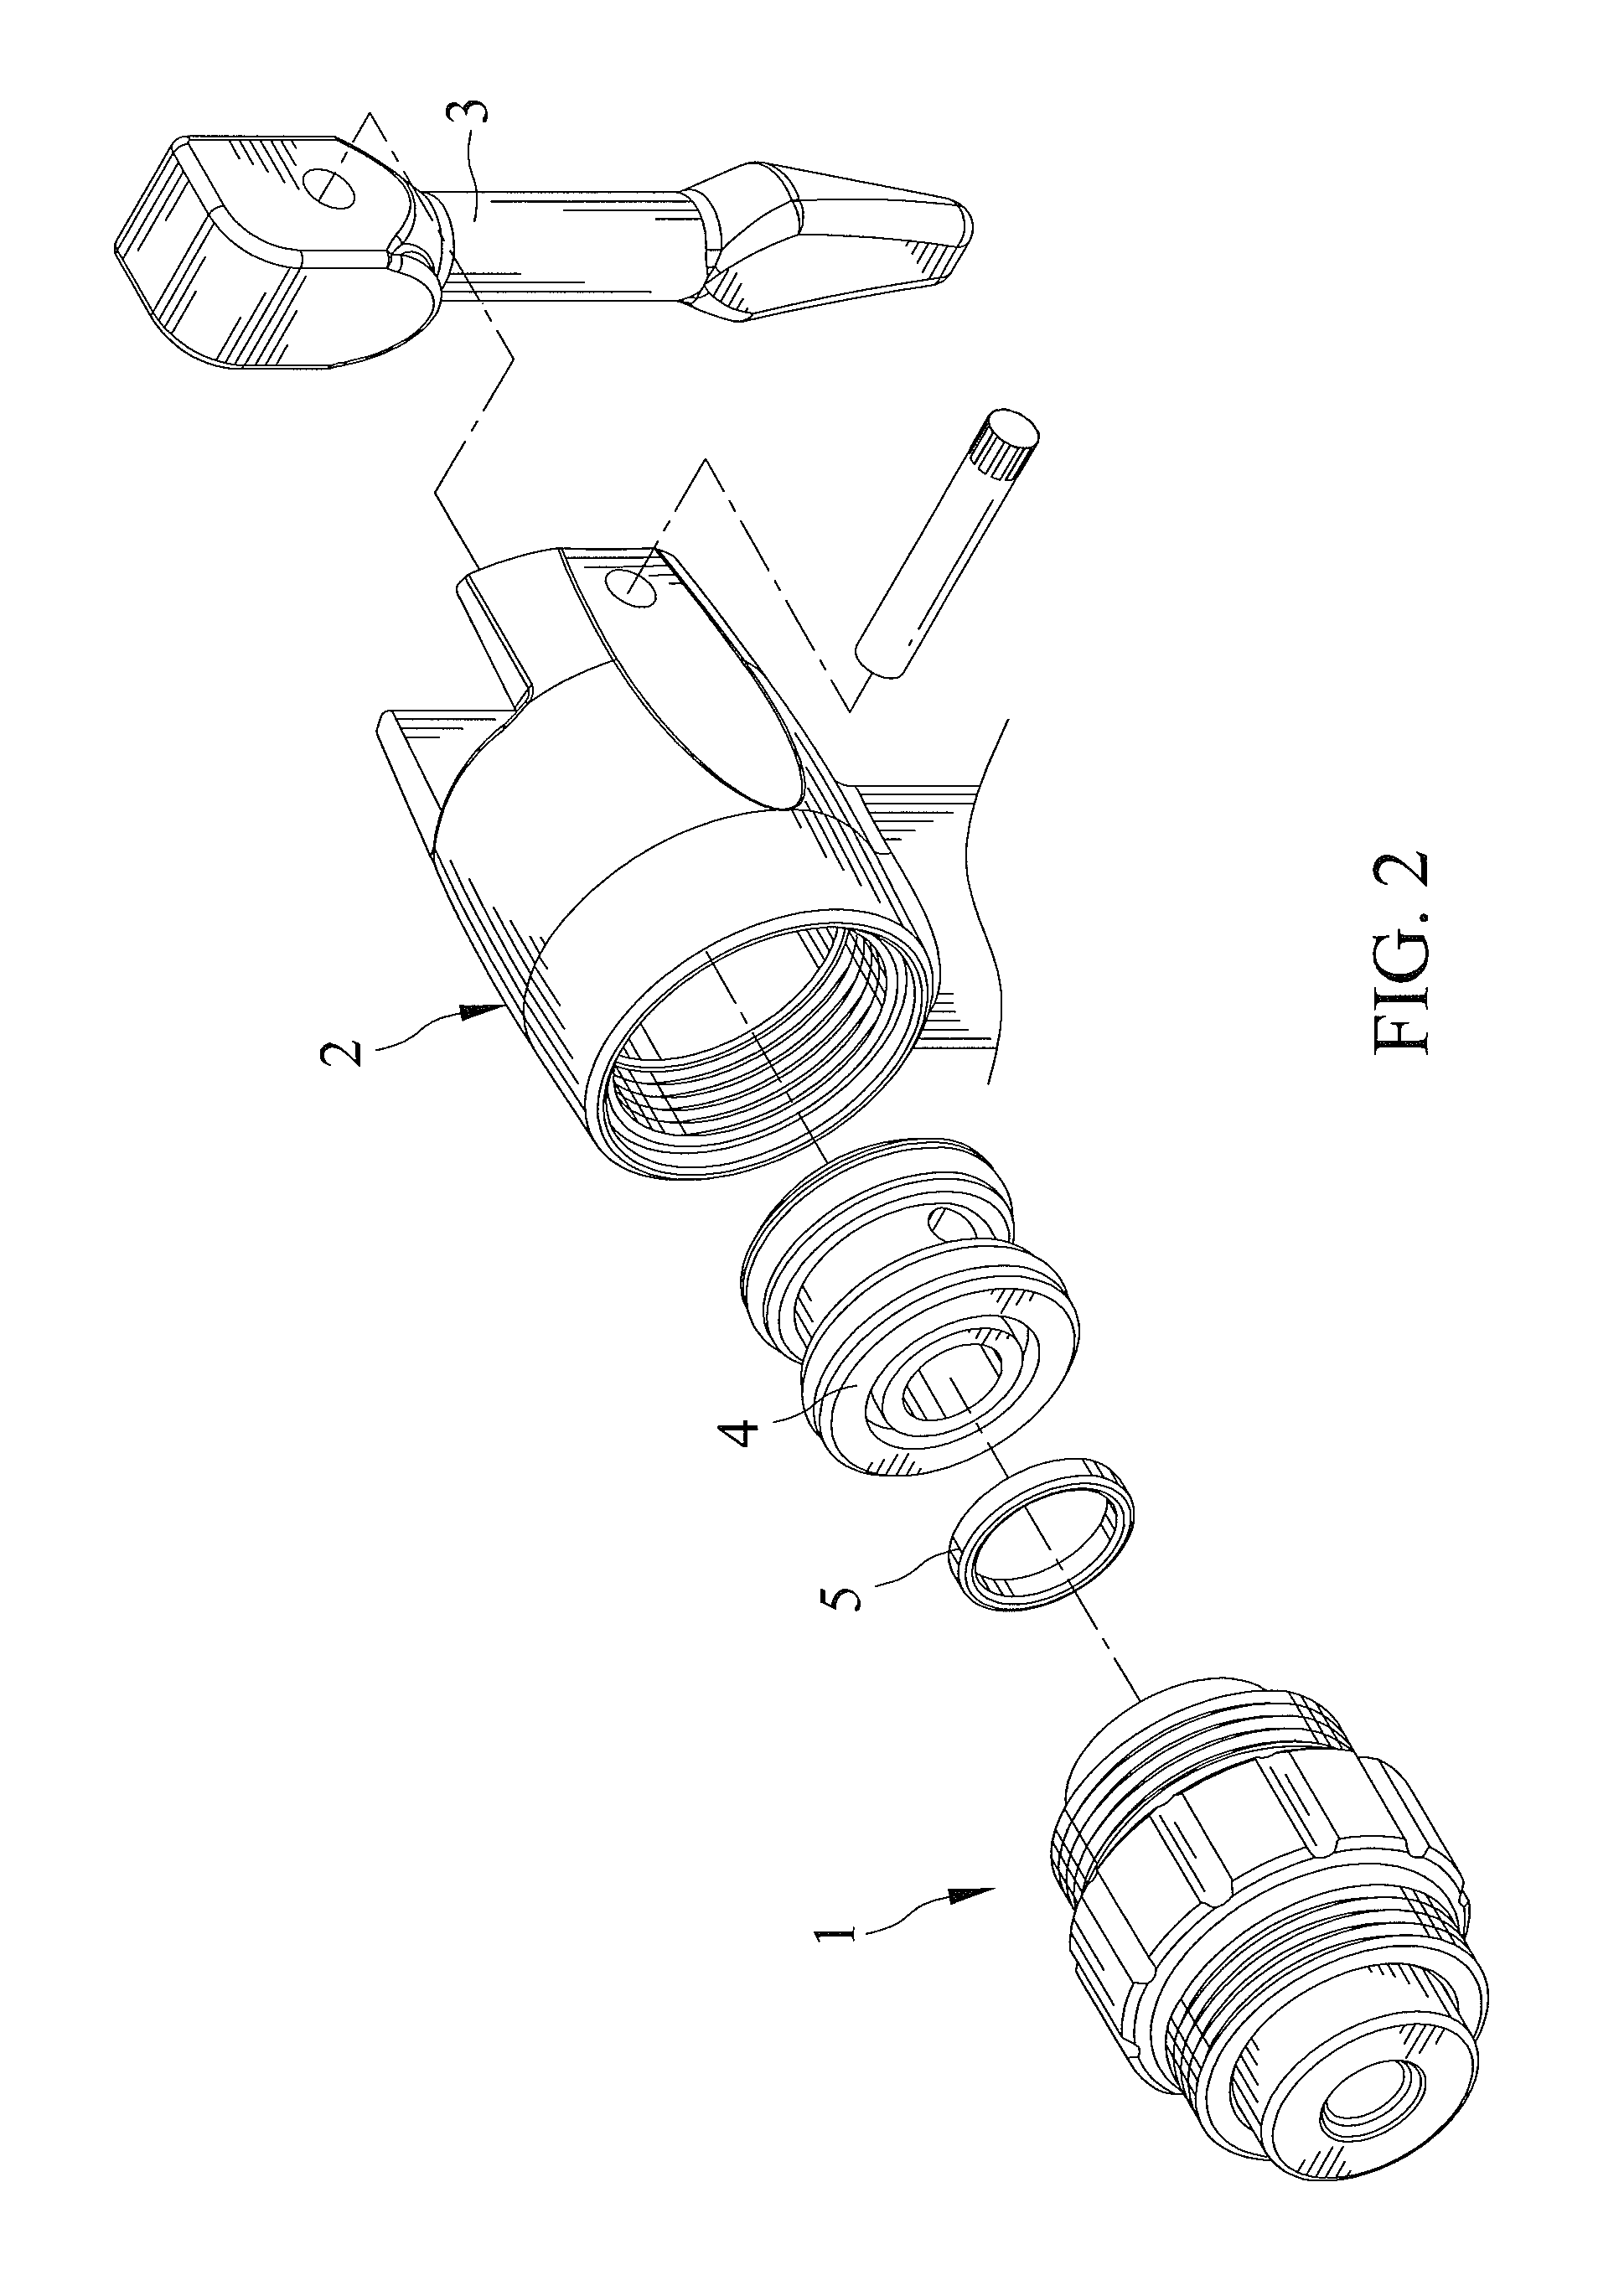 Air valve connector for connecting different valves